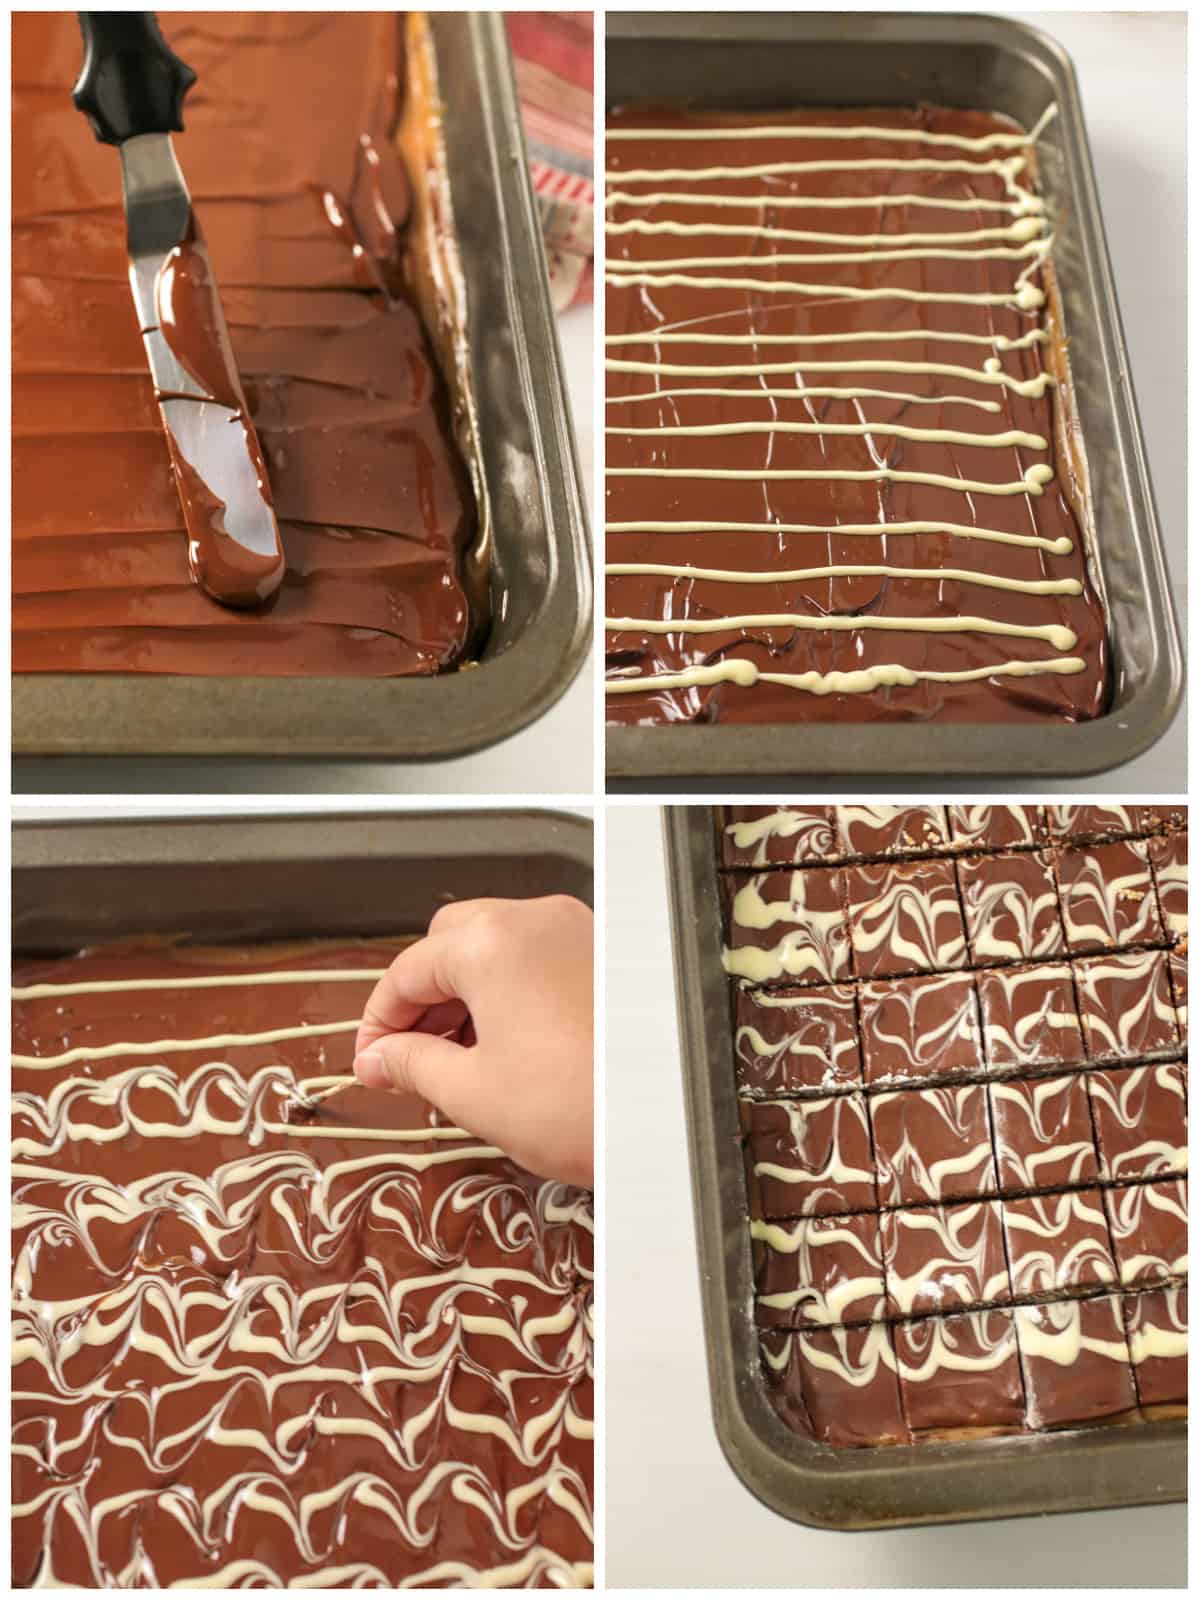 A collage showing the assembly of the top chocolate layer of the Marbled Shortbread Cookies.